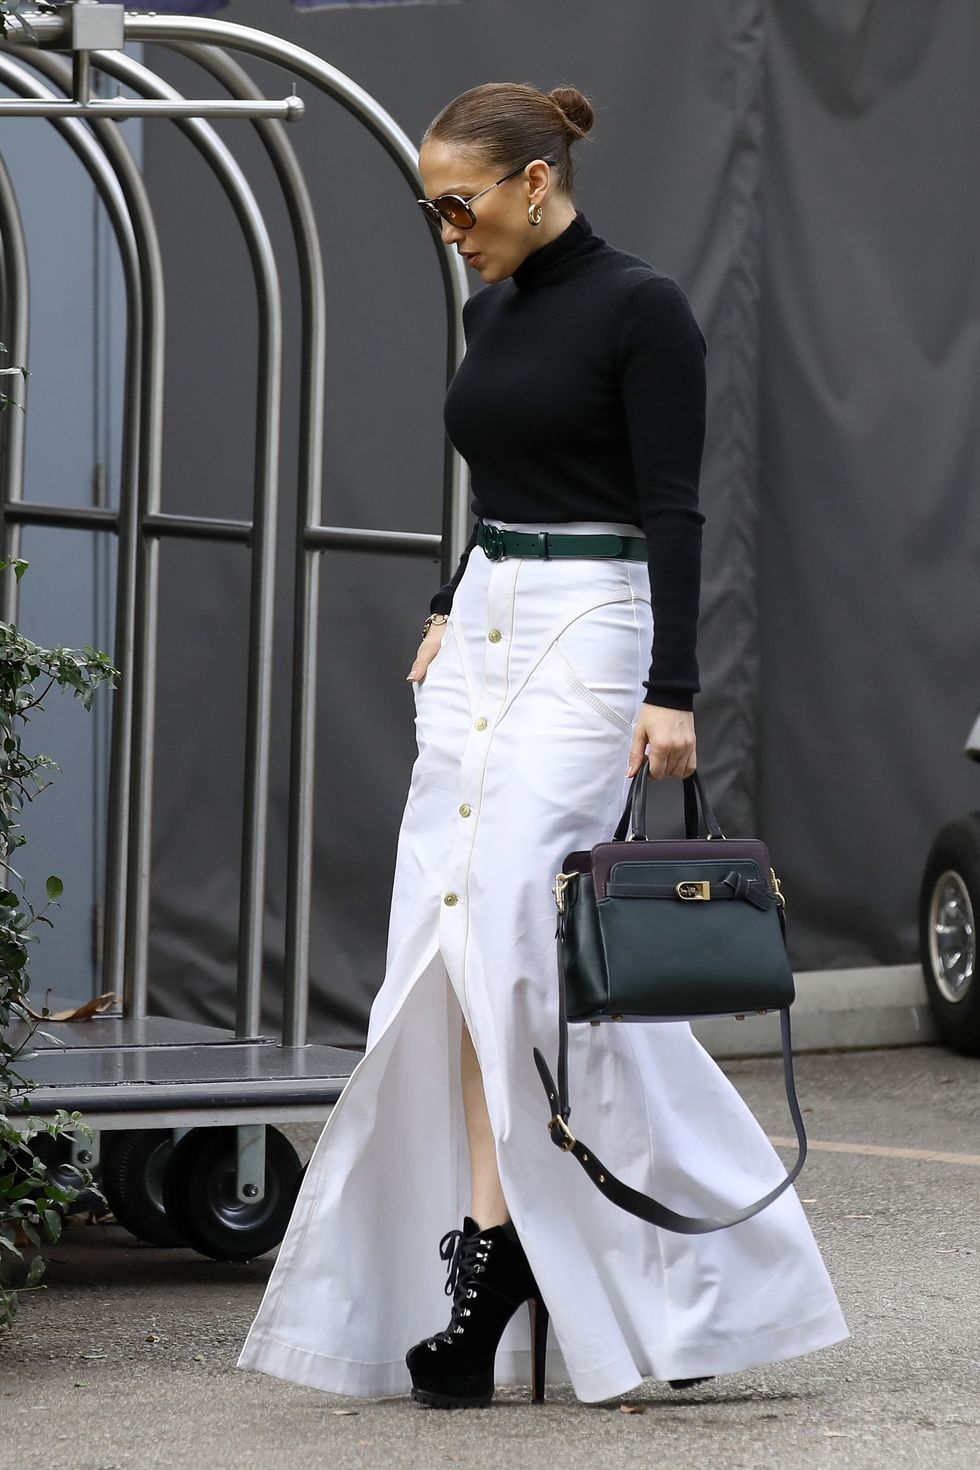 jlo in black turtleneck and white maxi skirt